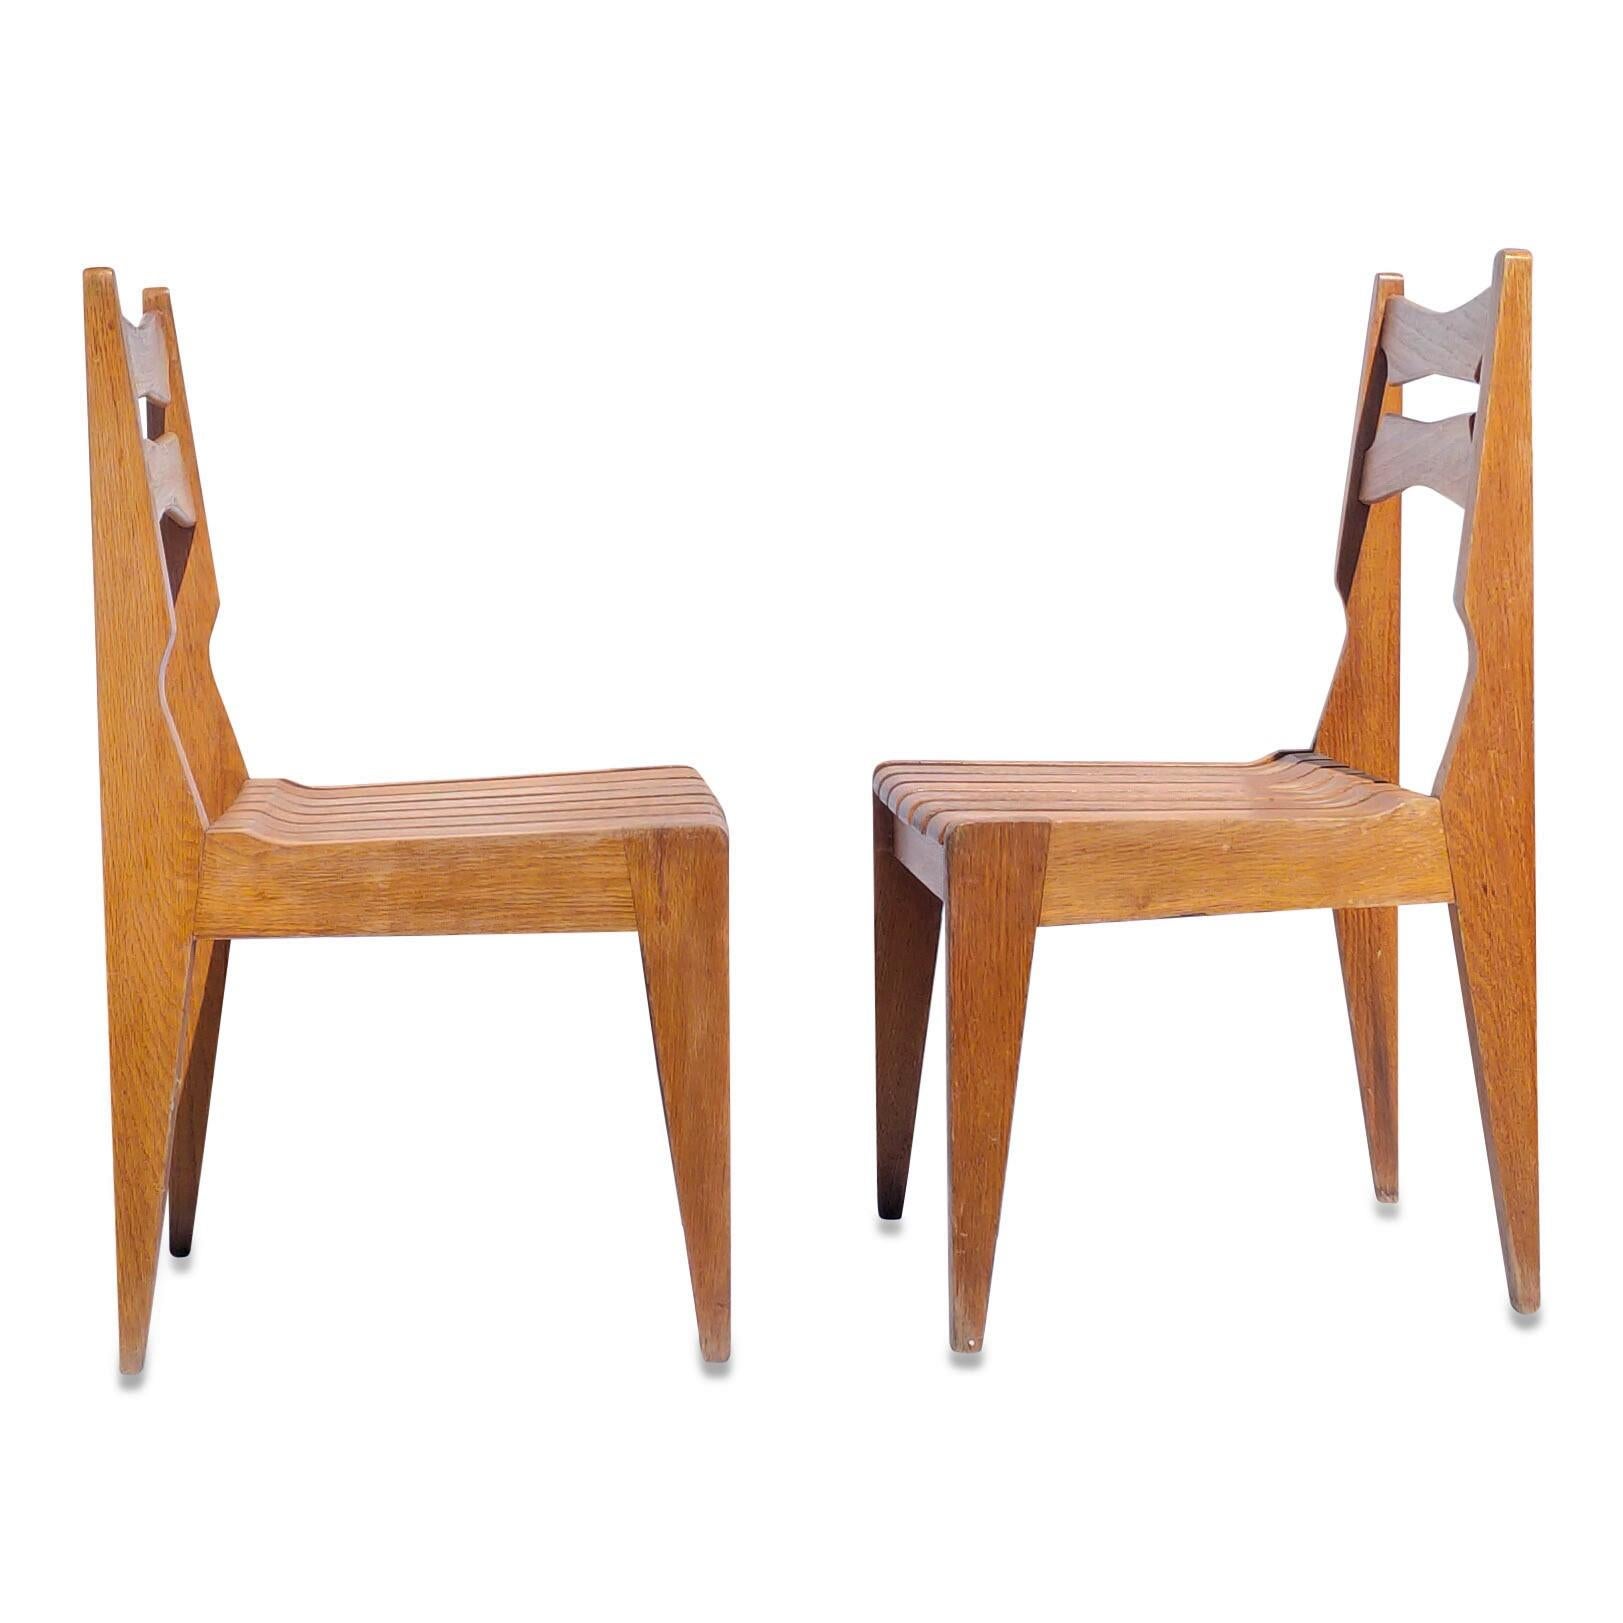 Set of 4 Solid Oak Slats Chairs by Guillerme & Chambron, France, 1960s For Sale 1